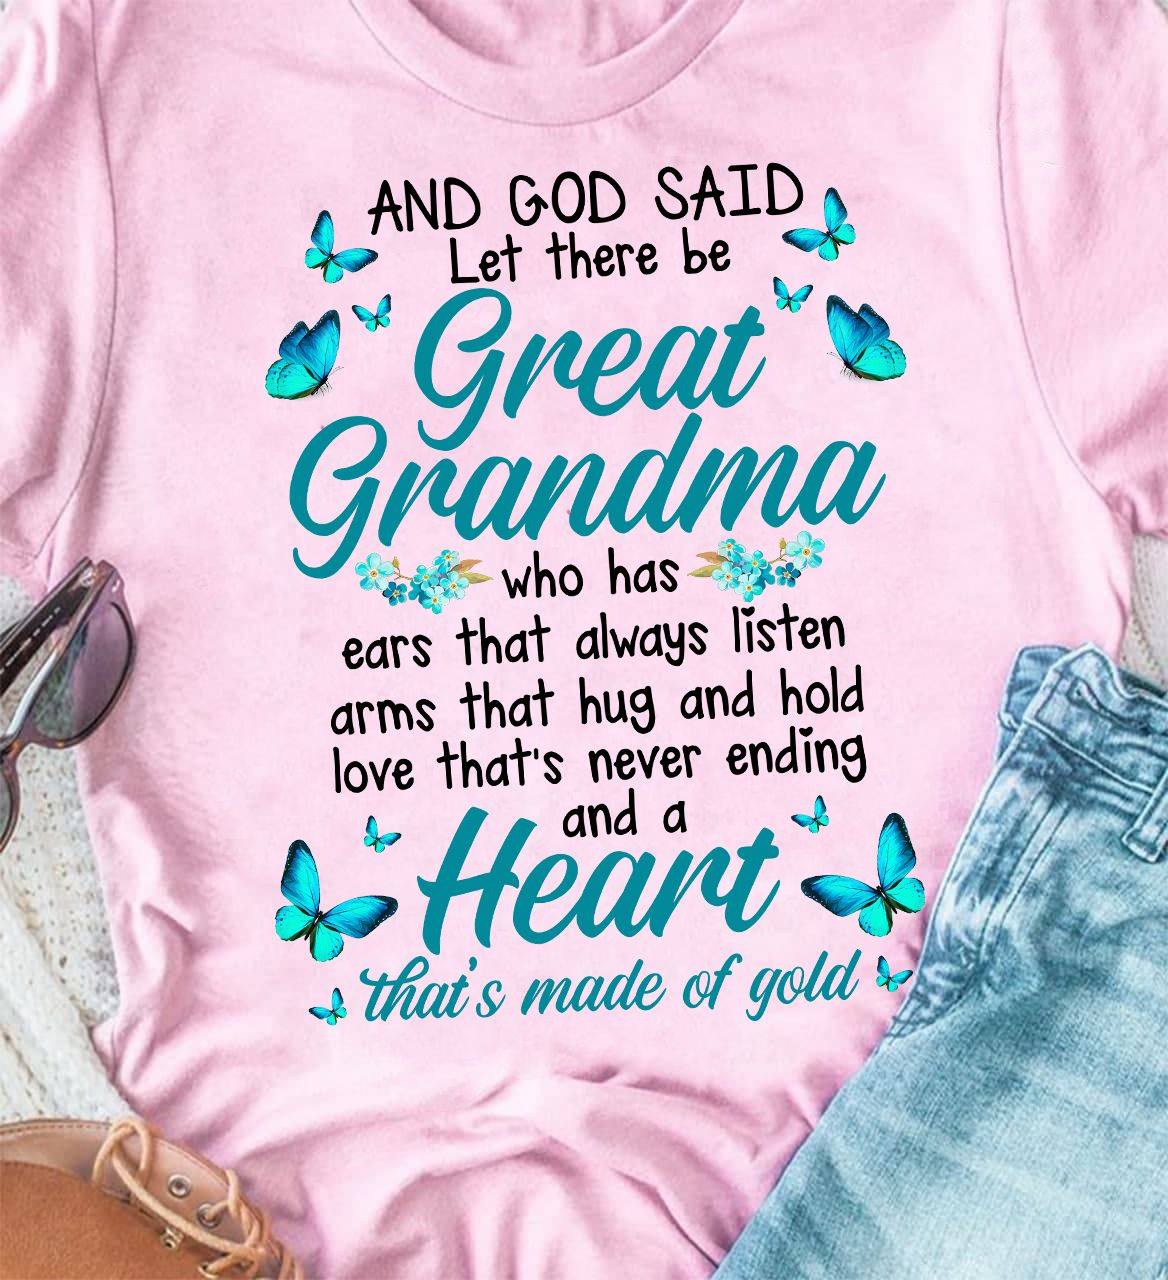 And god said let there be great grandma who has ears that always listen - Great grandma